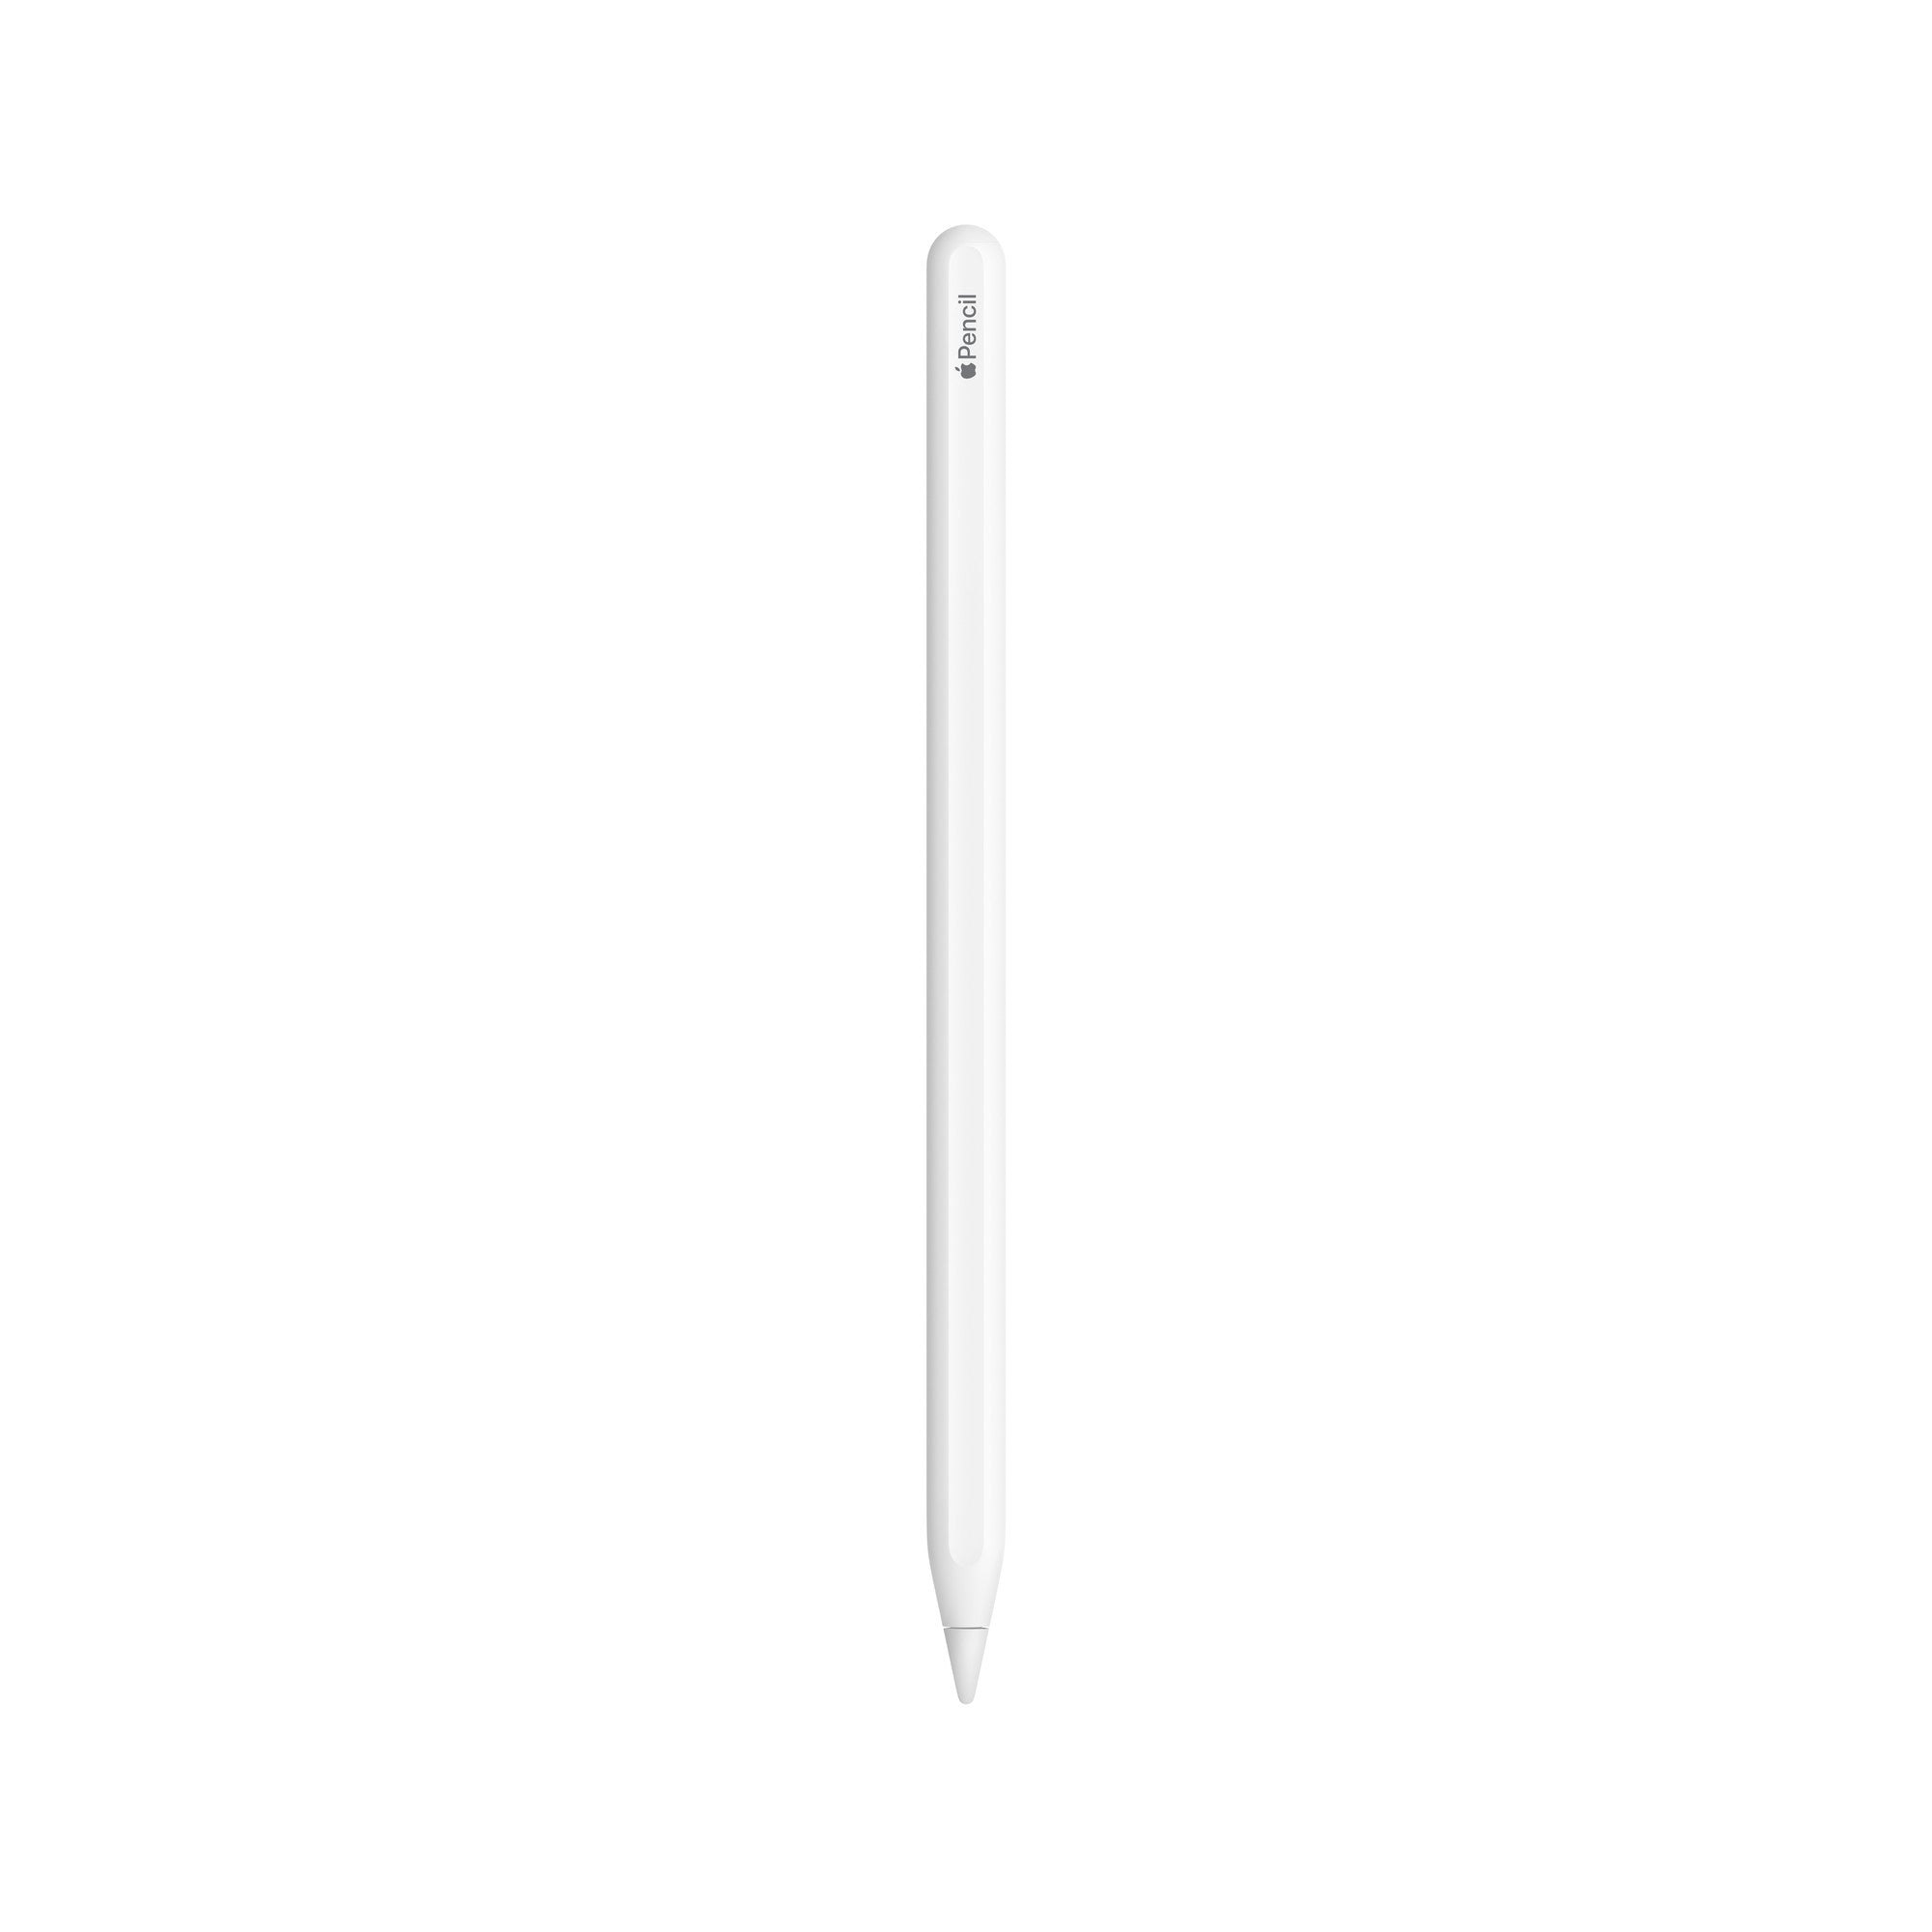 Apple Pencil (2nd Generation) (Like New) Free Shipping